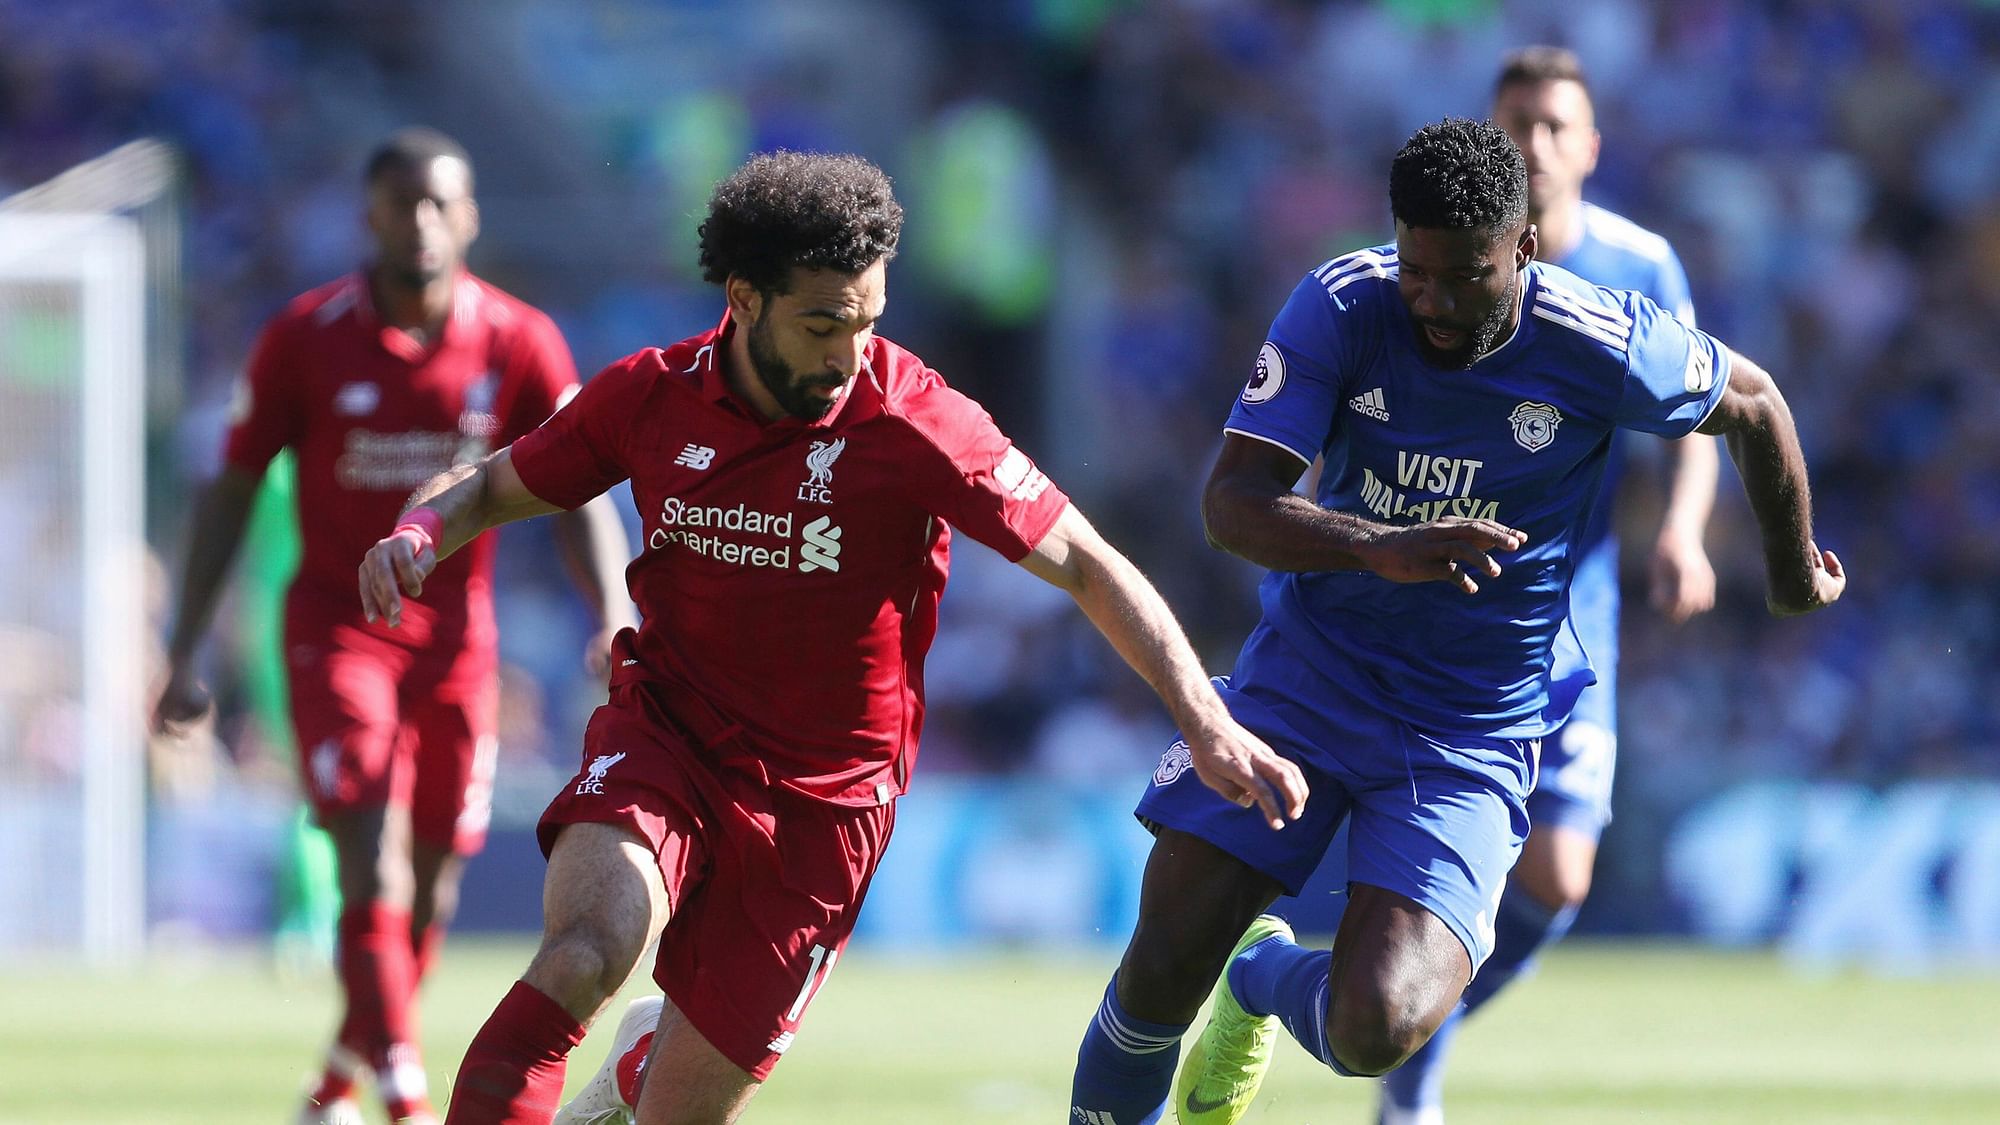 Liverpool returned to the top of the Premier League with a 2-0 victory at Cardiff on Sunday.